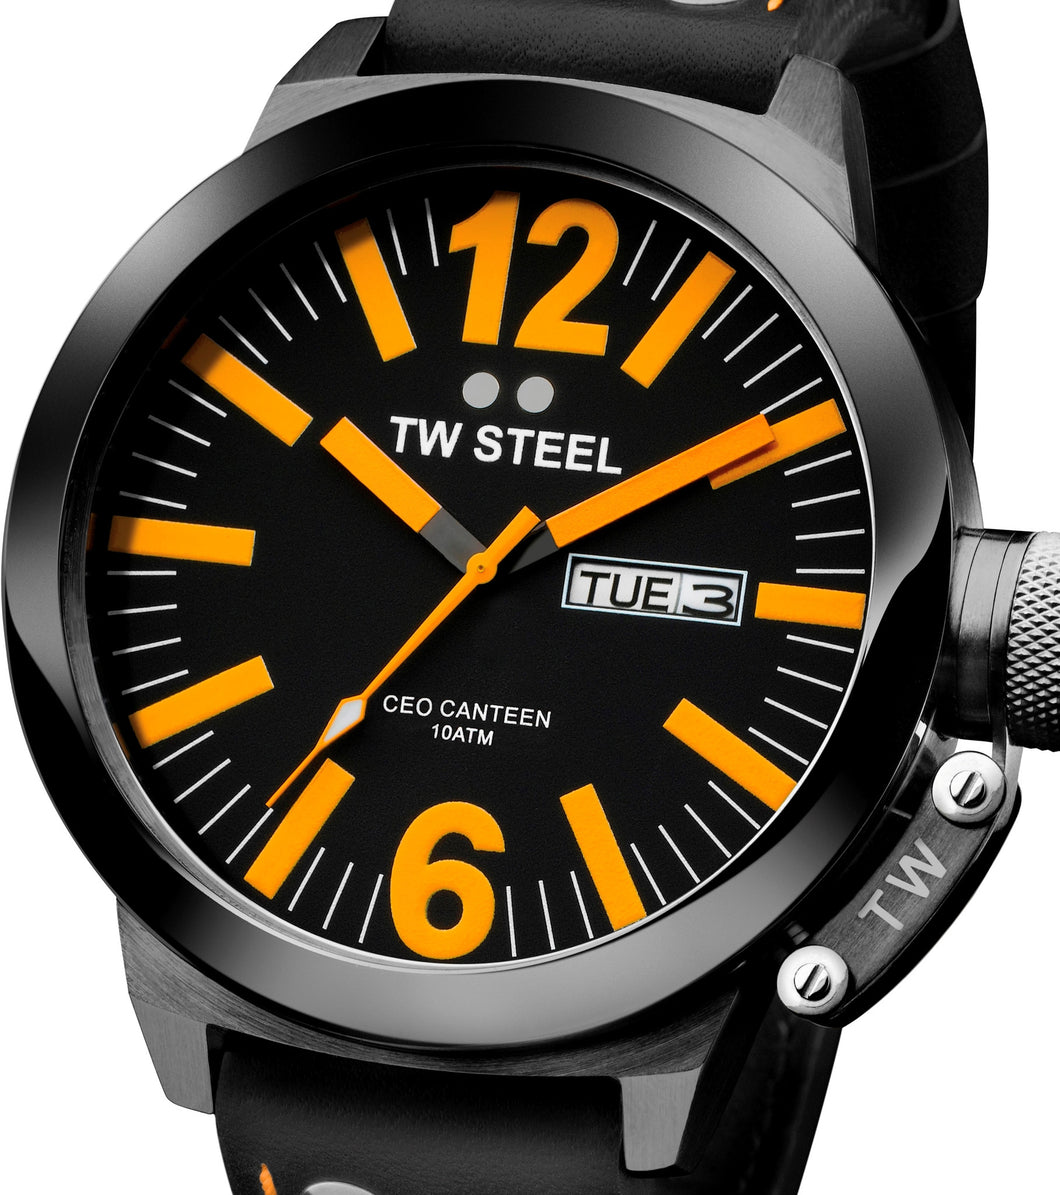 Authentic TW STEEL CEO Canteen Oversized Mens Watch